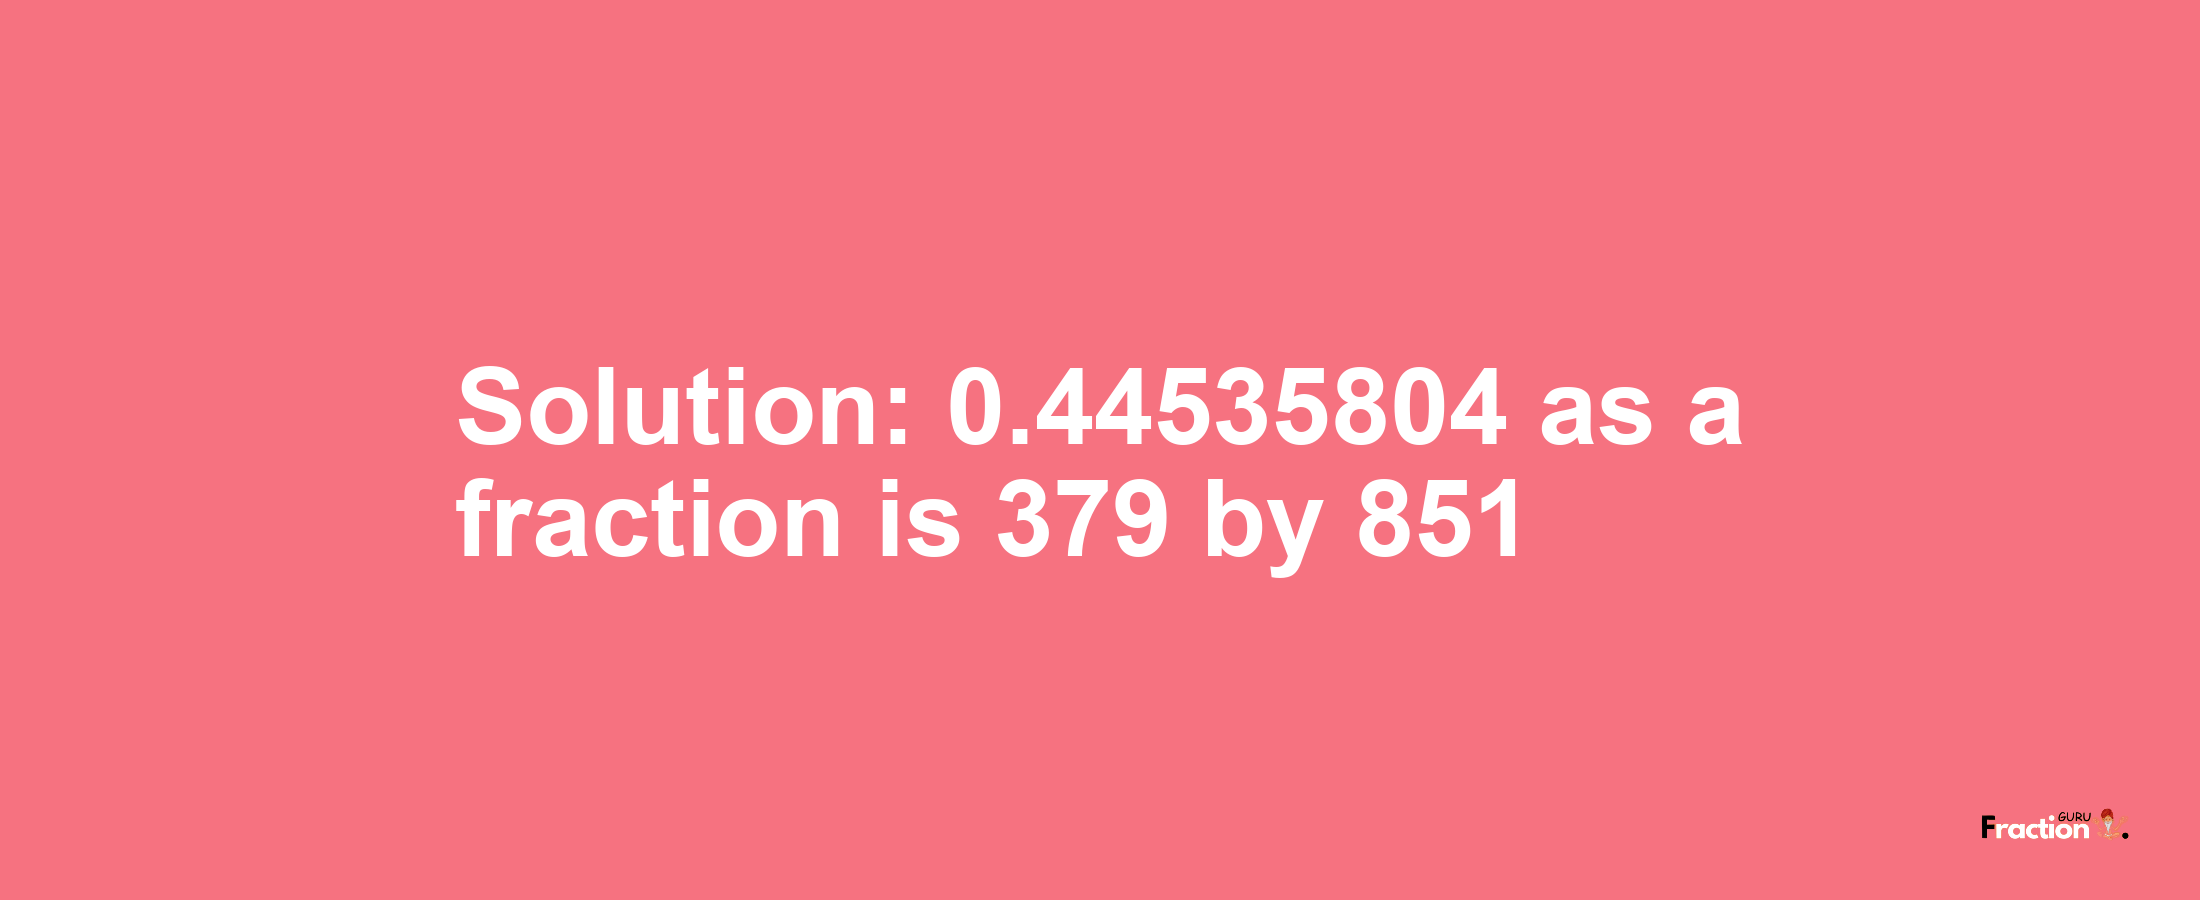 Solution:0.44535804 as a fraction is 379/851